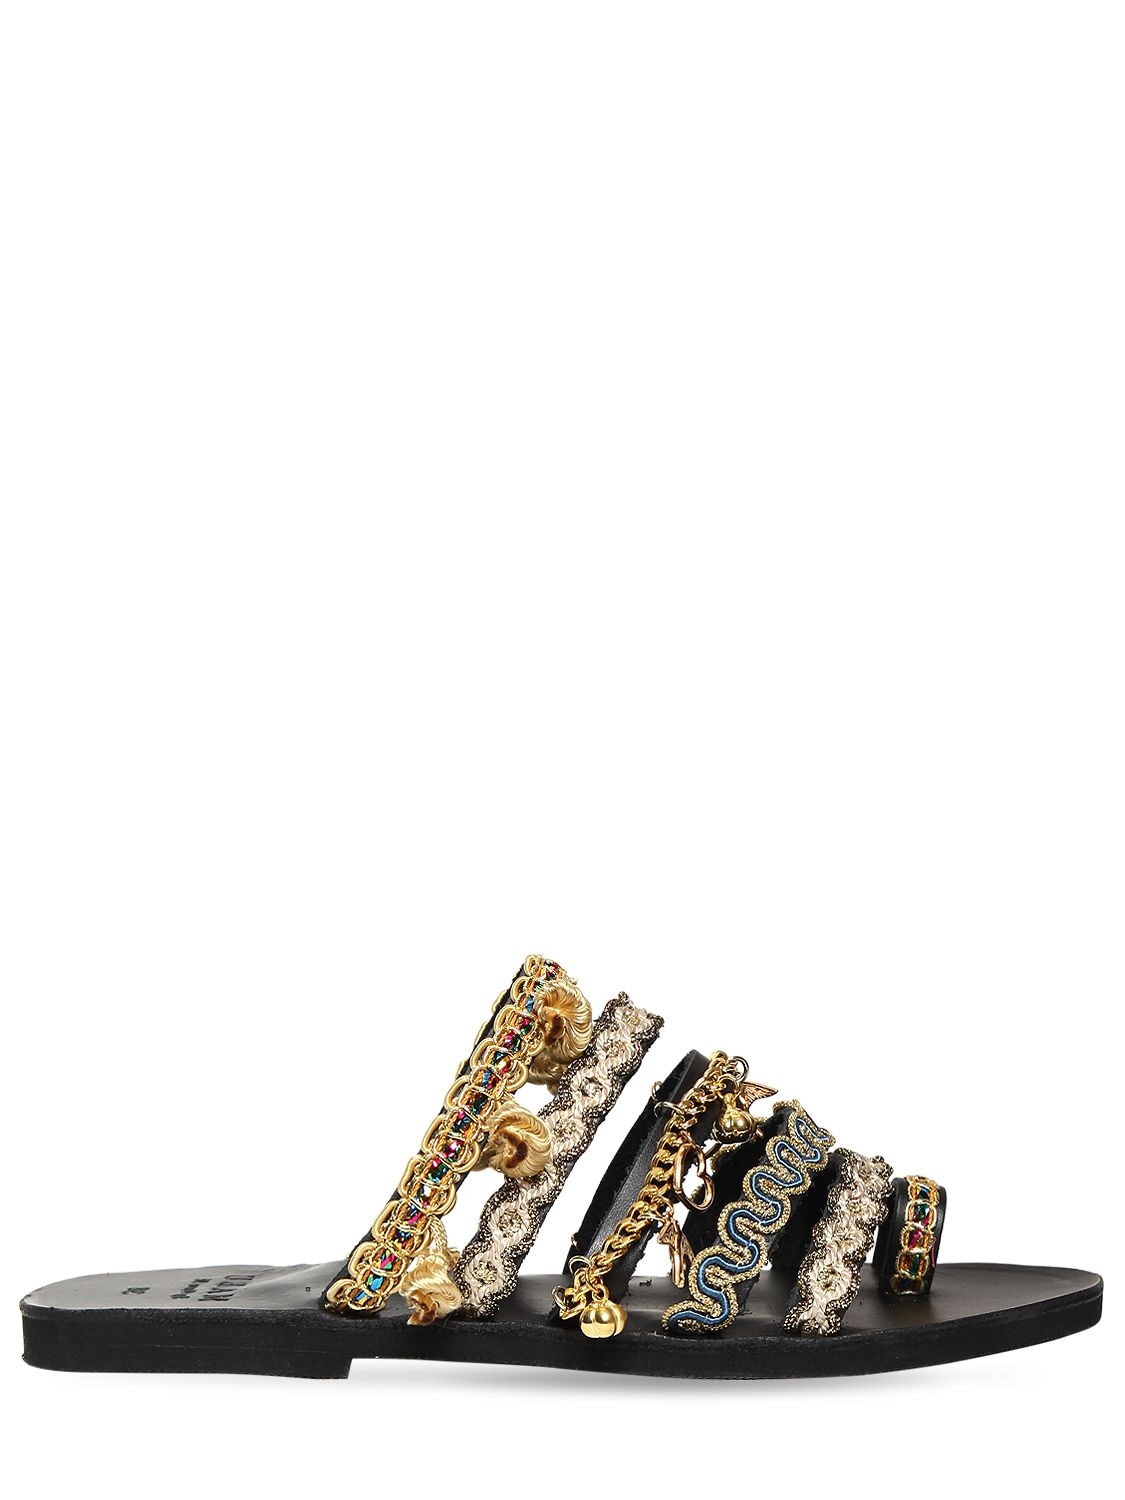 Mabu By Maria Bk 10mm Serlida Embroidered Sandals In Black,gold